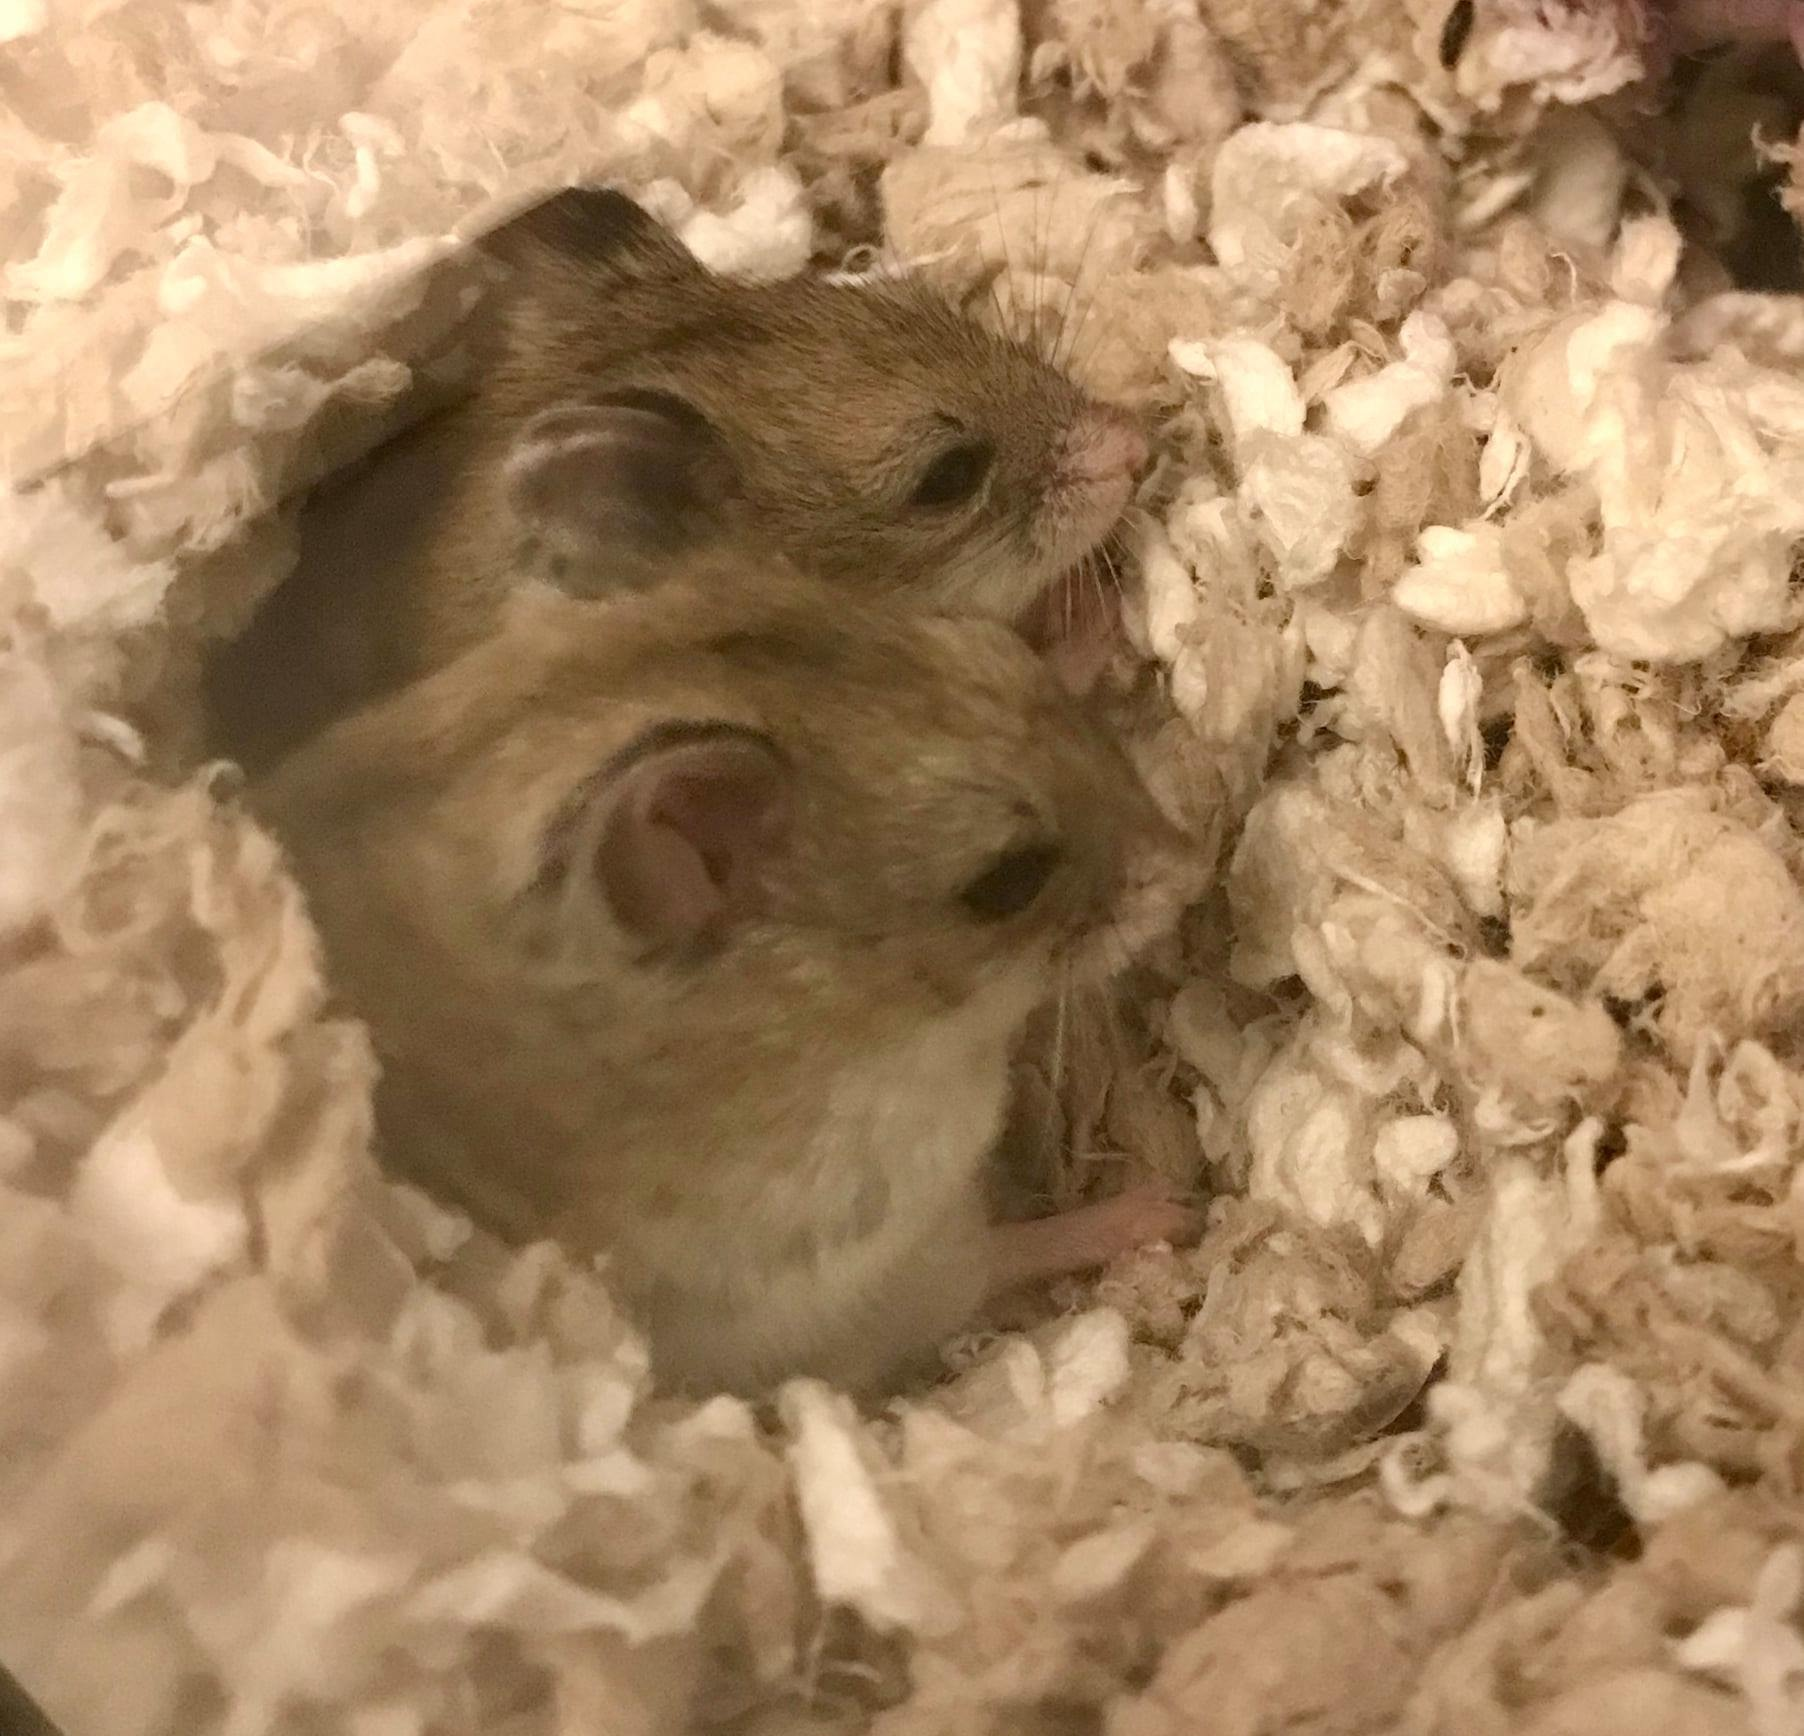 Color photo of two identical hamsters sitting side by side in a pile of fluff.